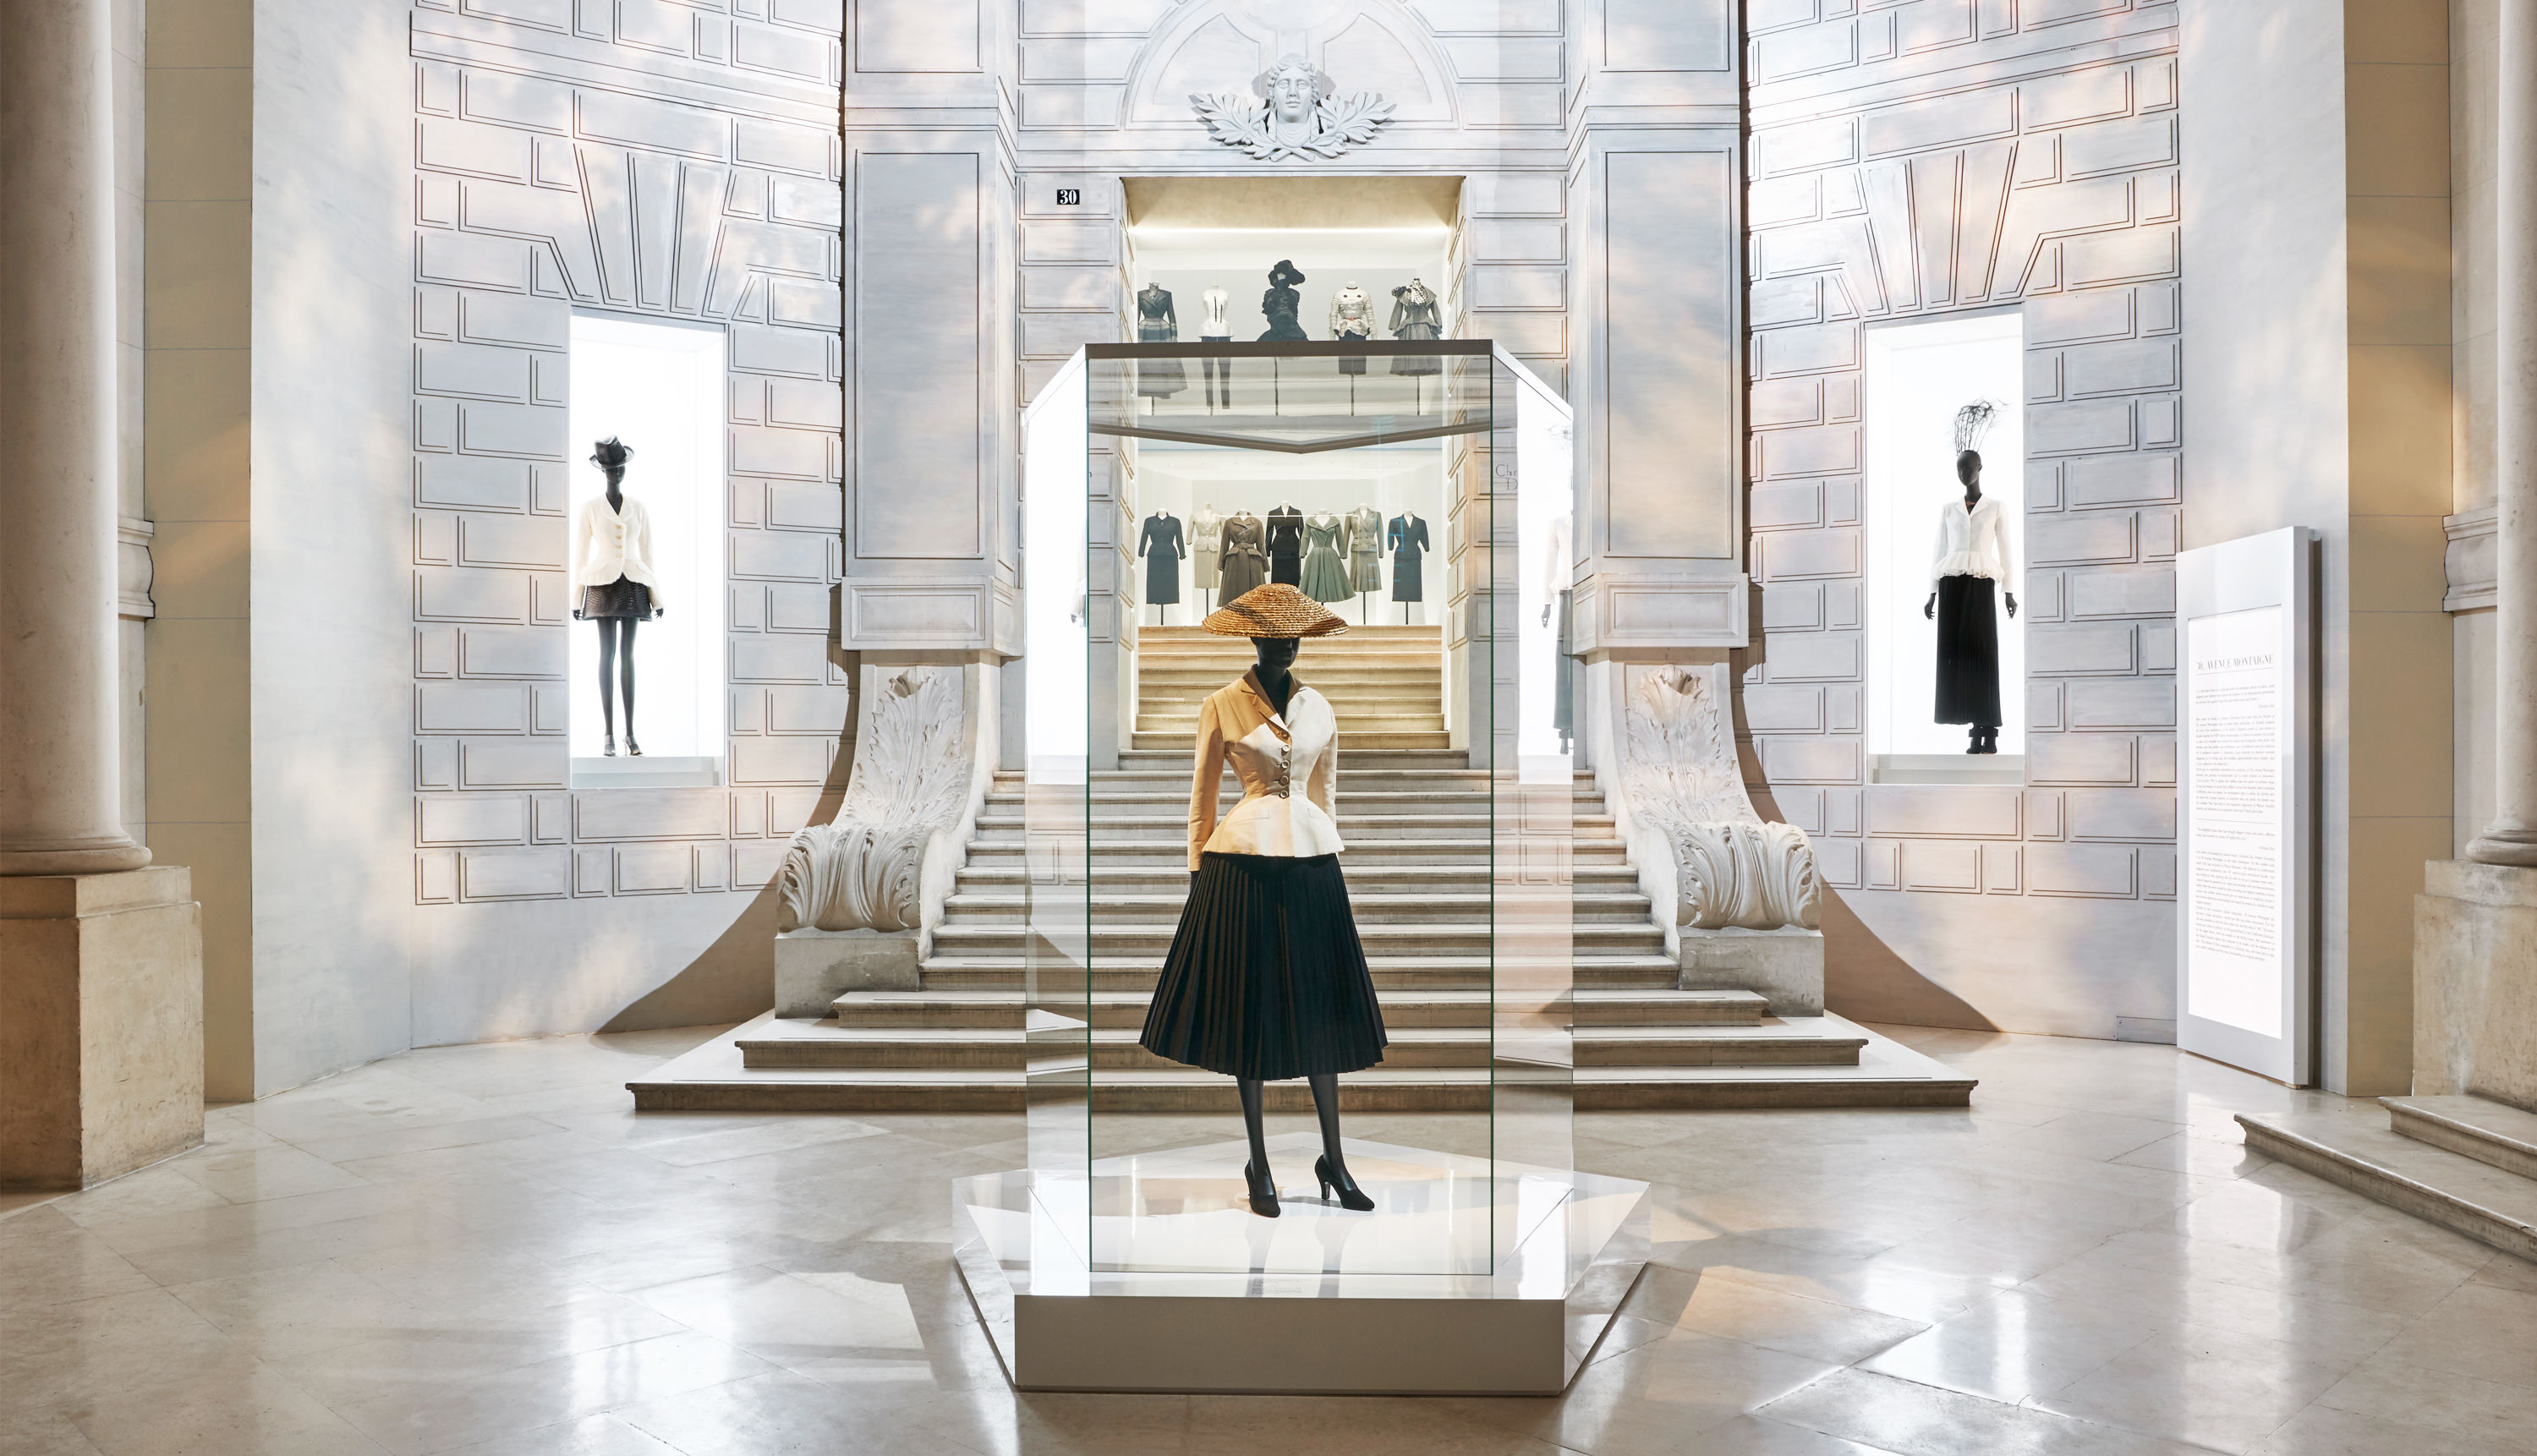 What to expect from the biggest Dior exhibition ever staged in Paris